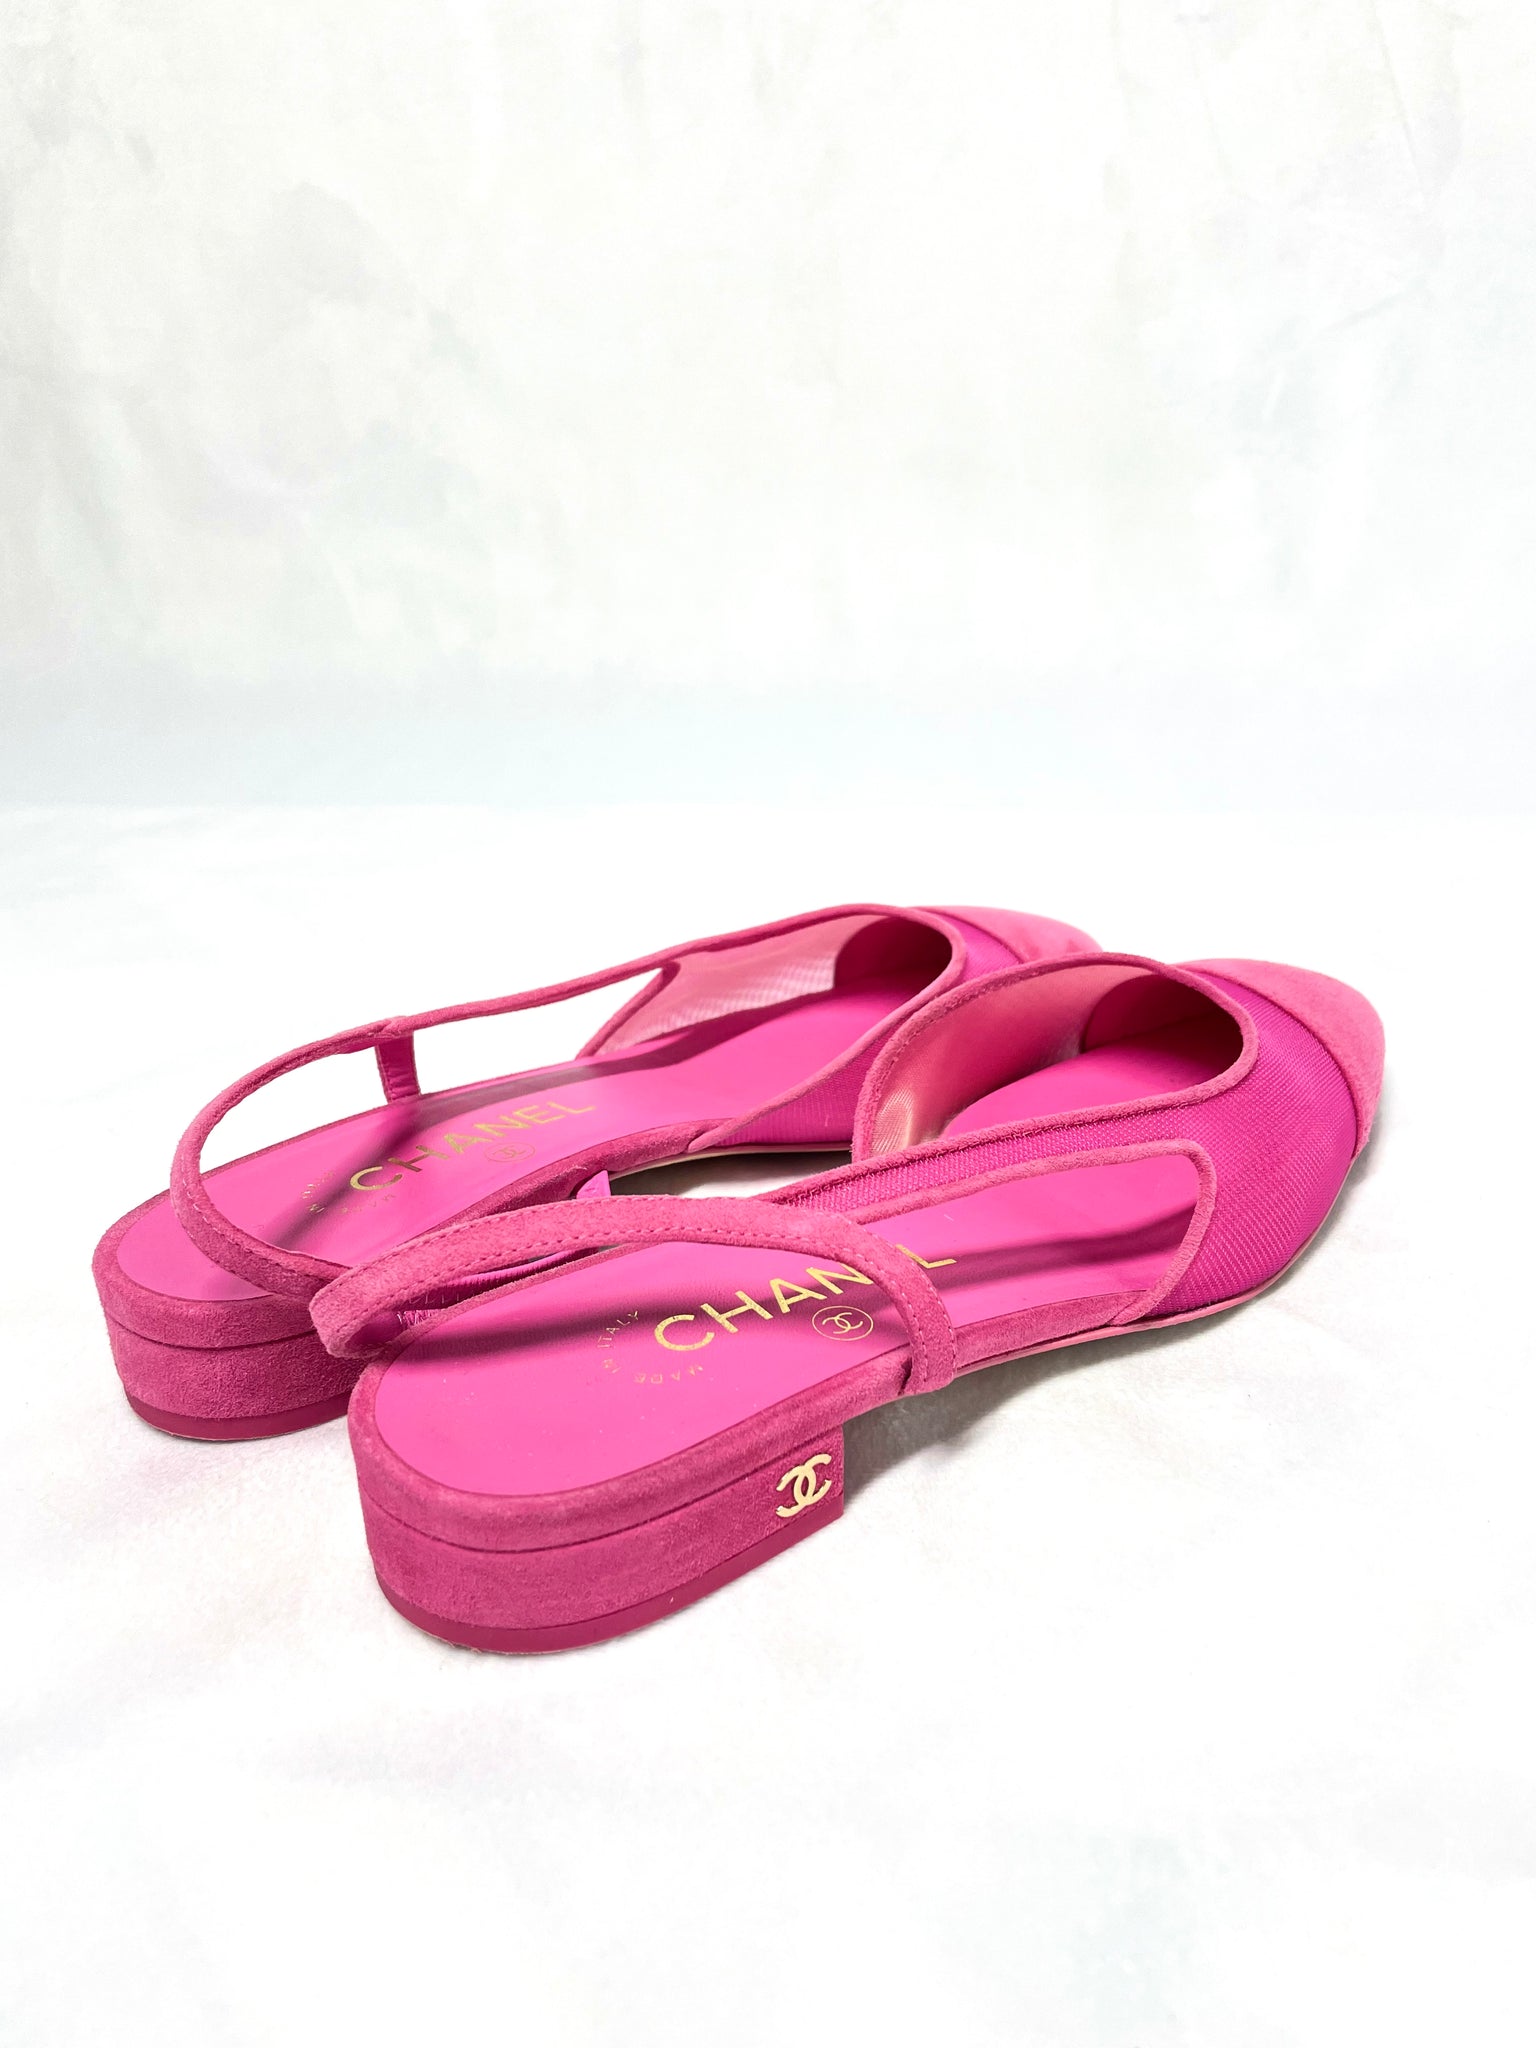 Preloved Chanel Pink Suede Slingback Sandals available at UniKoncept in Waterloo